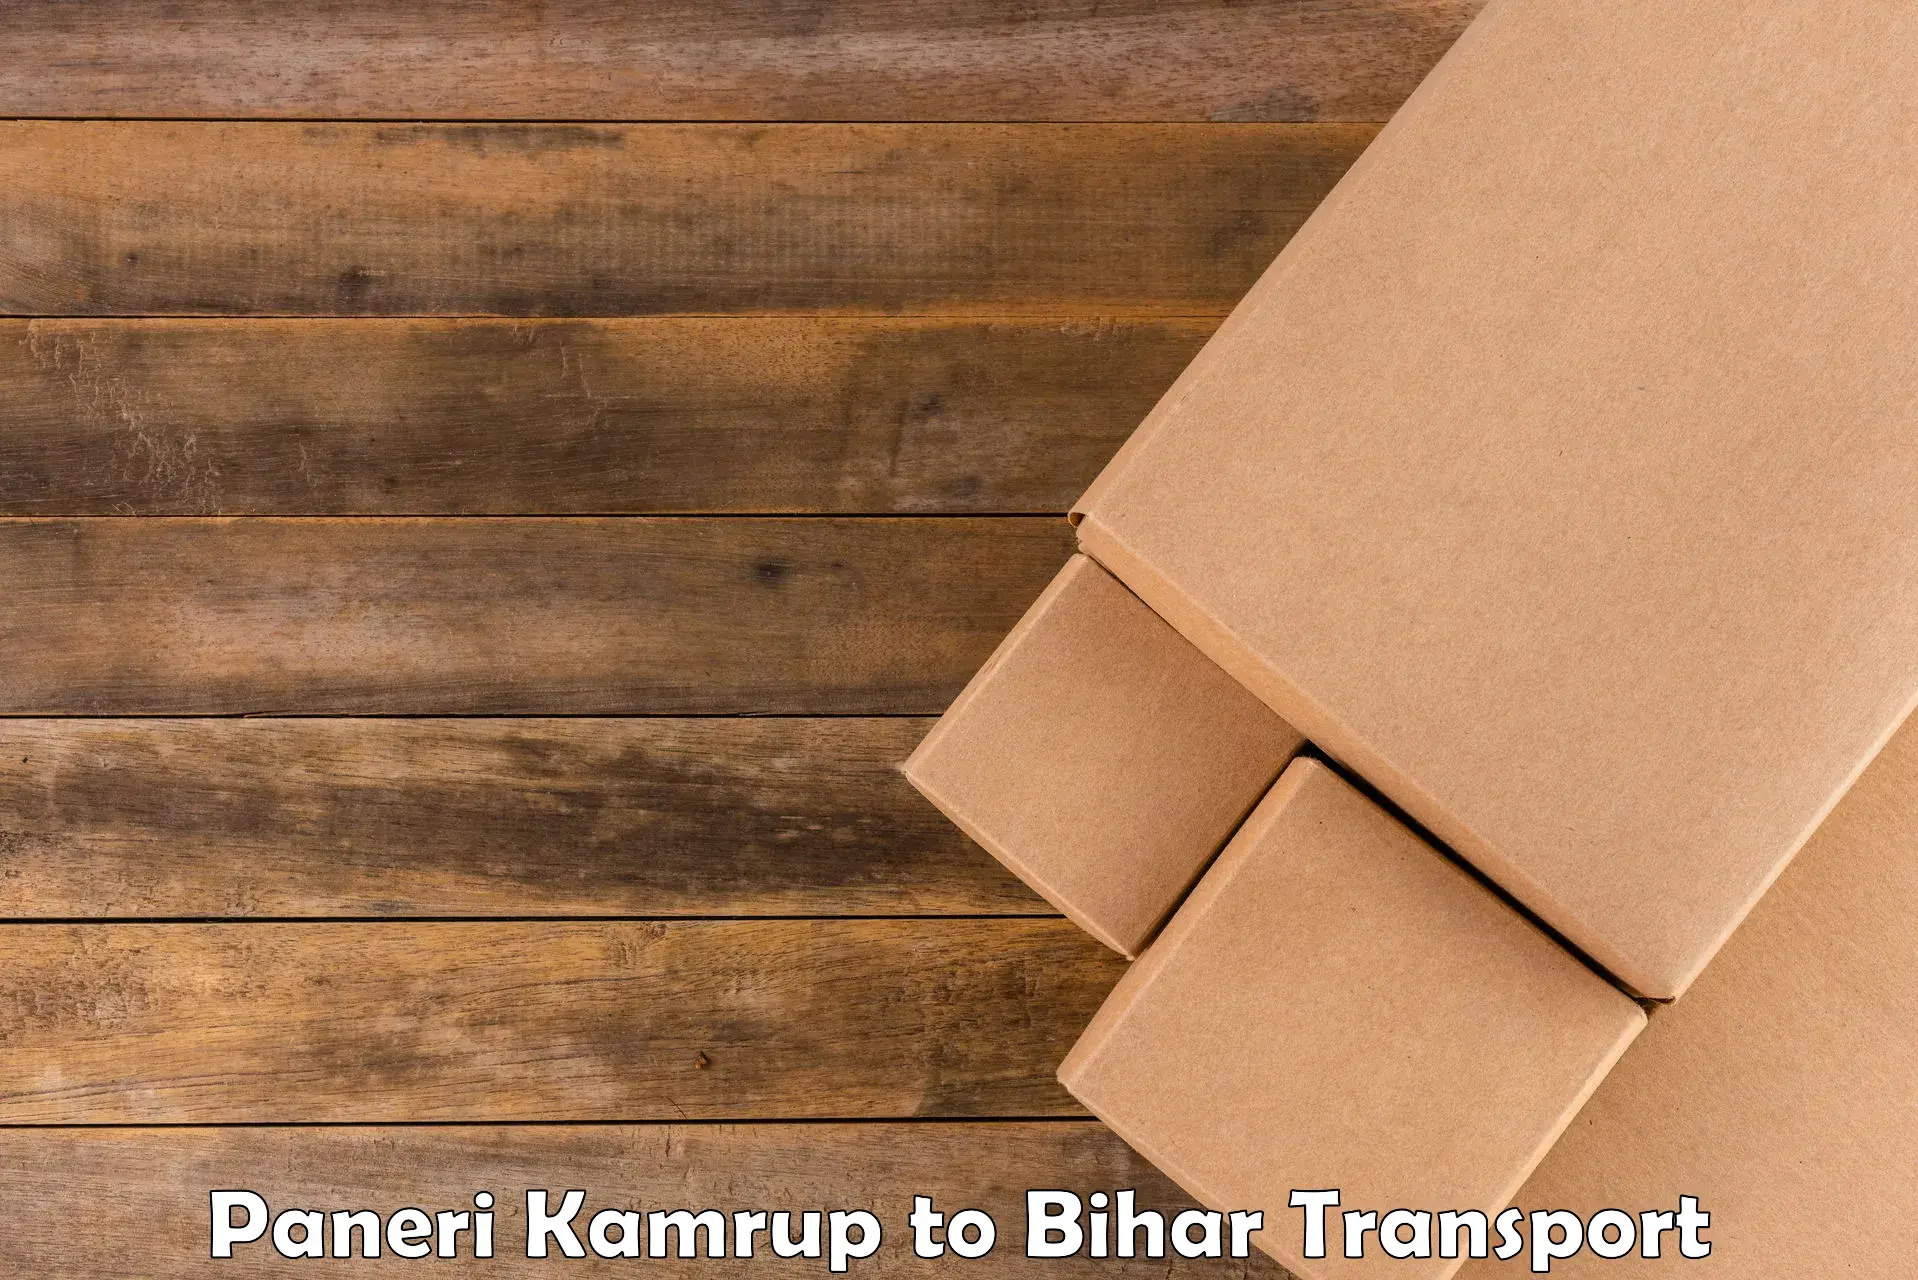 Best transport services in India Paneri Kamrup to Rajgir